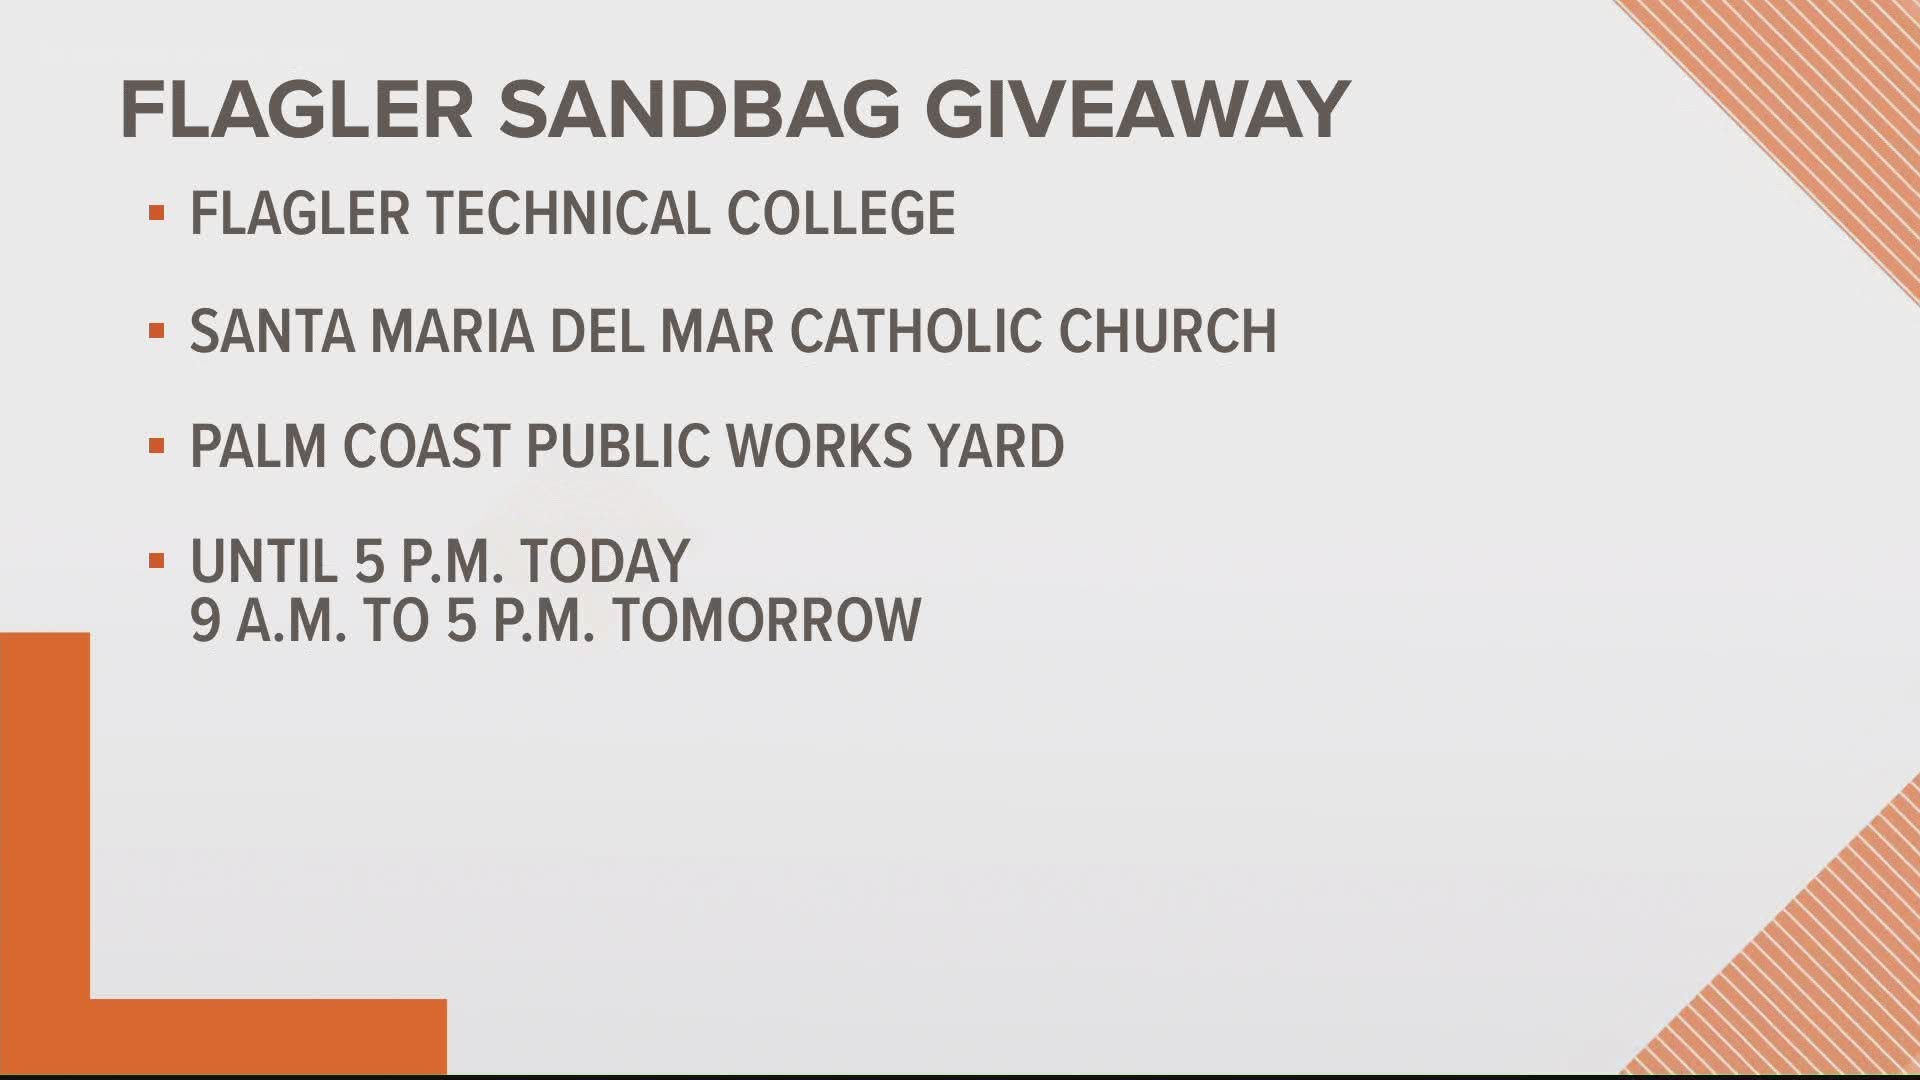 The free sandbags will be available until 5 p.m. Friday and from 9 a.m. to 5 p.m. Saturday.